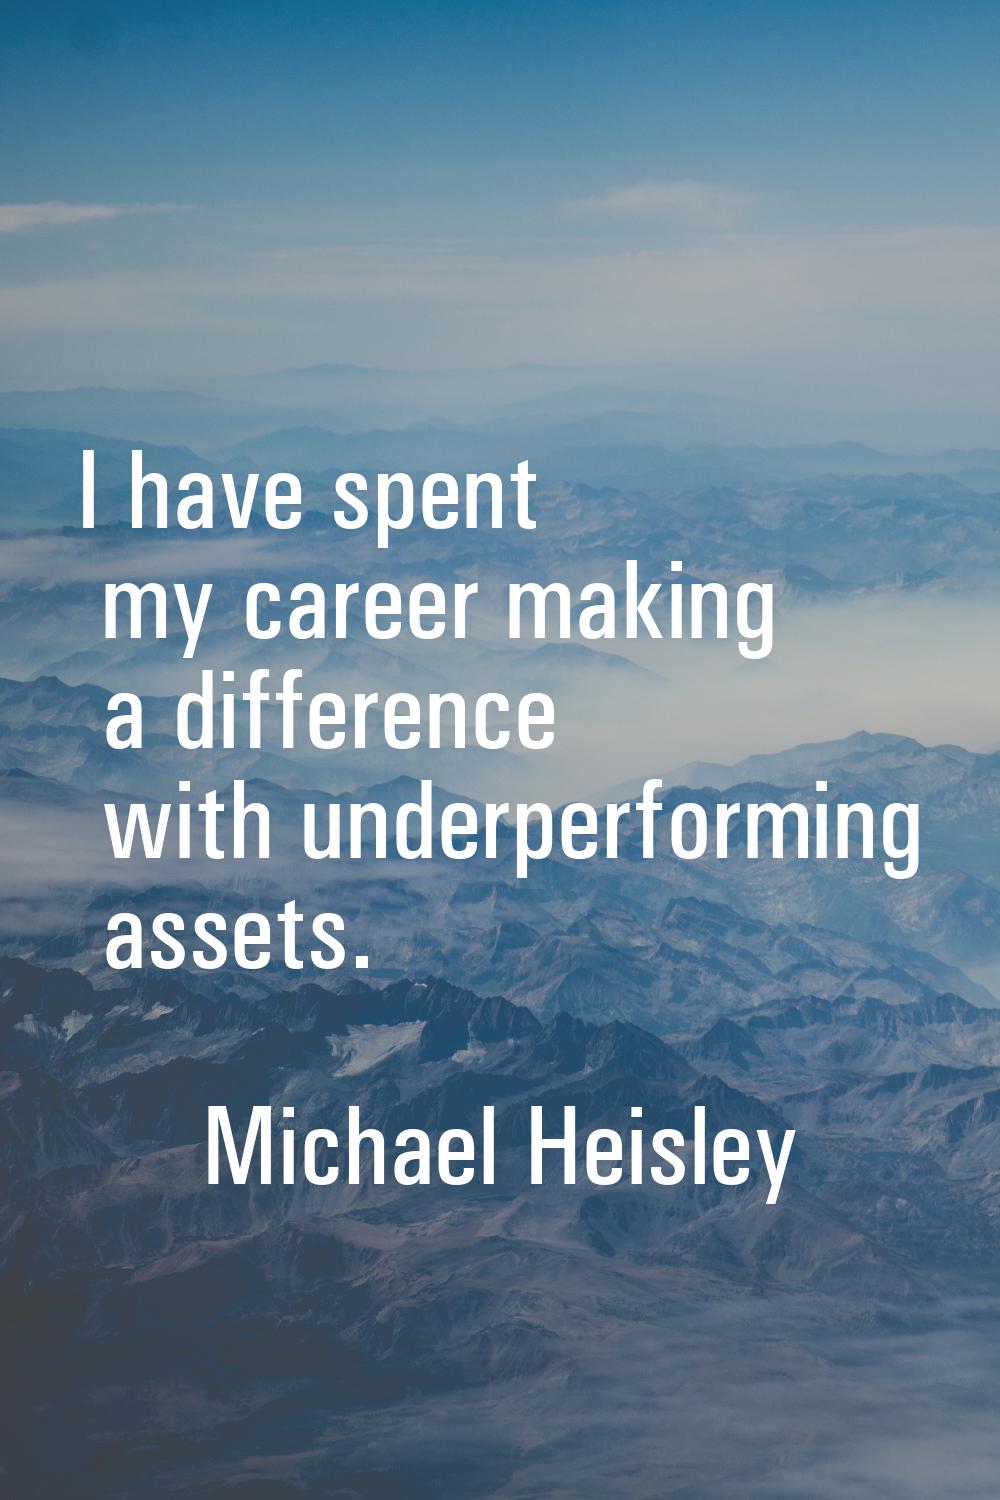 I have spent my career making a difference with underperforming assets.